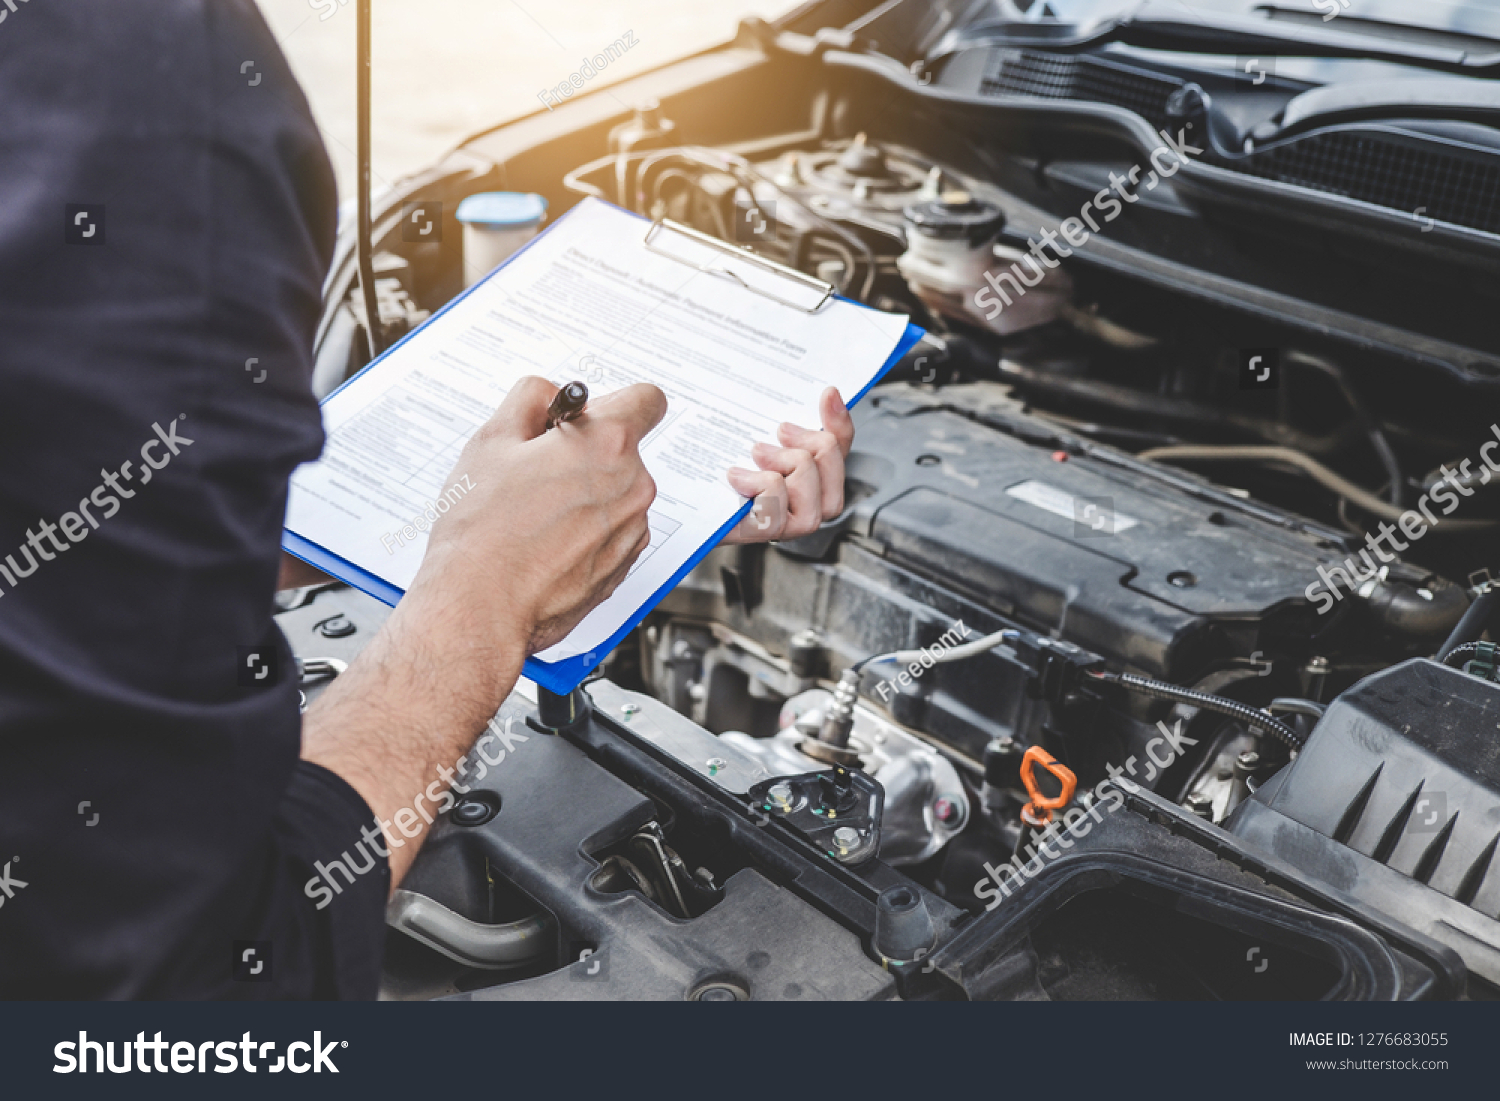 Services car engine machine concept, Automobile mechanic repairman checking a car engine with inspecting writing to the clipboard the checklist for repair machine, car service and maintenance. #1276683055